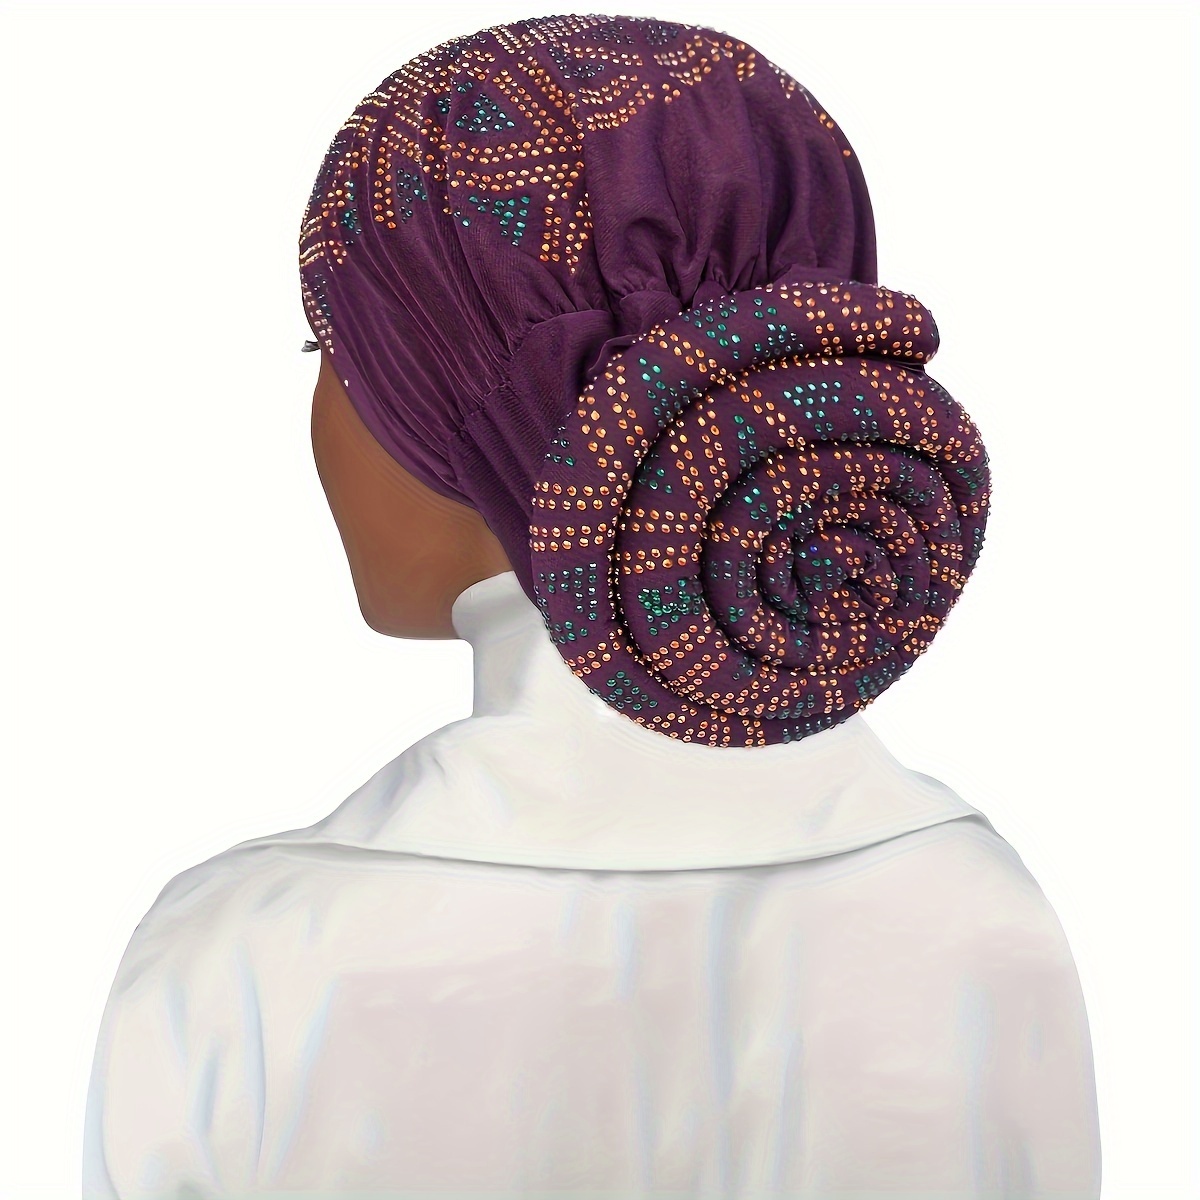 

African Style Elastic Turban Hat, Large Flower Design Head Wrap, Breathable Under Scarf, Full Neck Coverage Cap, Chemo Headwear Bonnet, Windproof Inner Cap For Women – Versatile Fashion Accessory